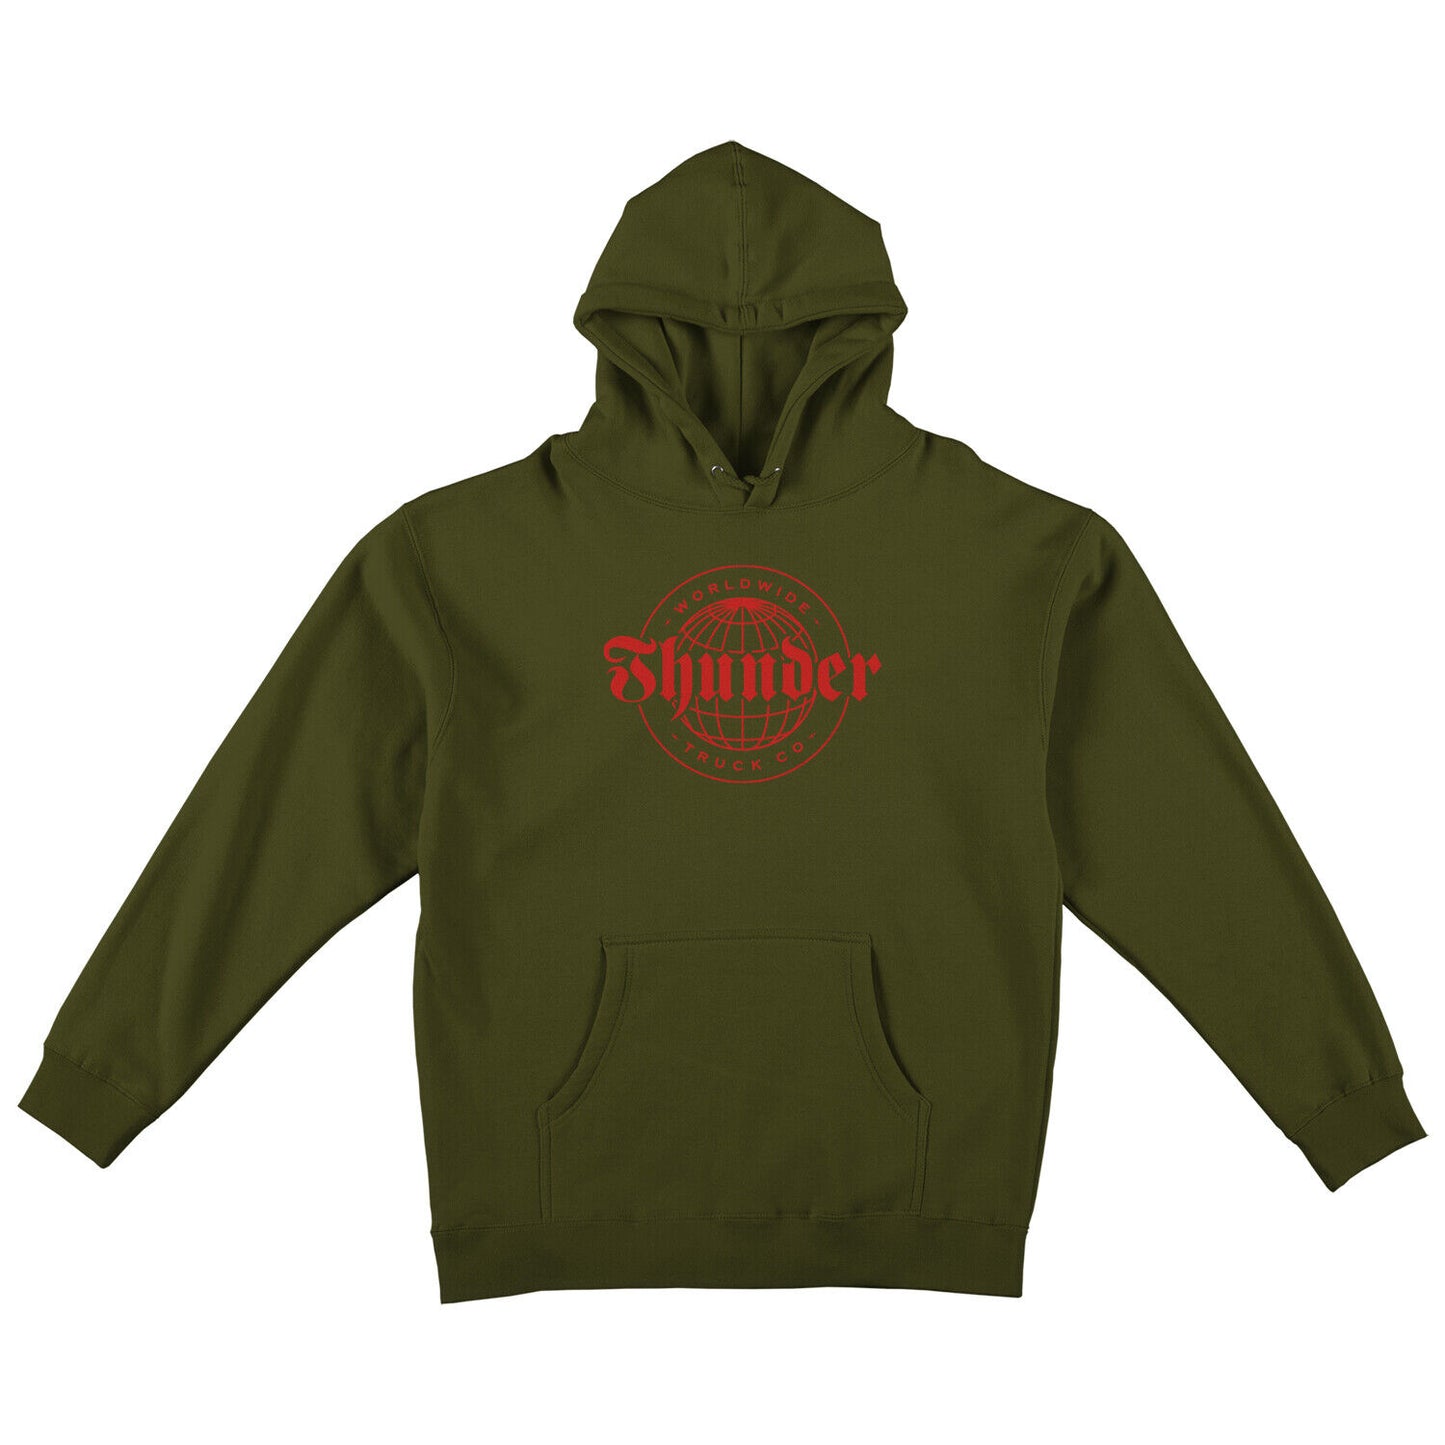 THUNDER - WORLDWIDE PULLOVER HOODED SWEATSHIRT - ARMY/RED